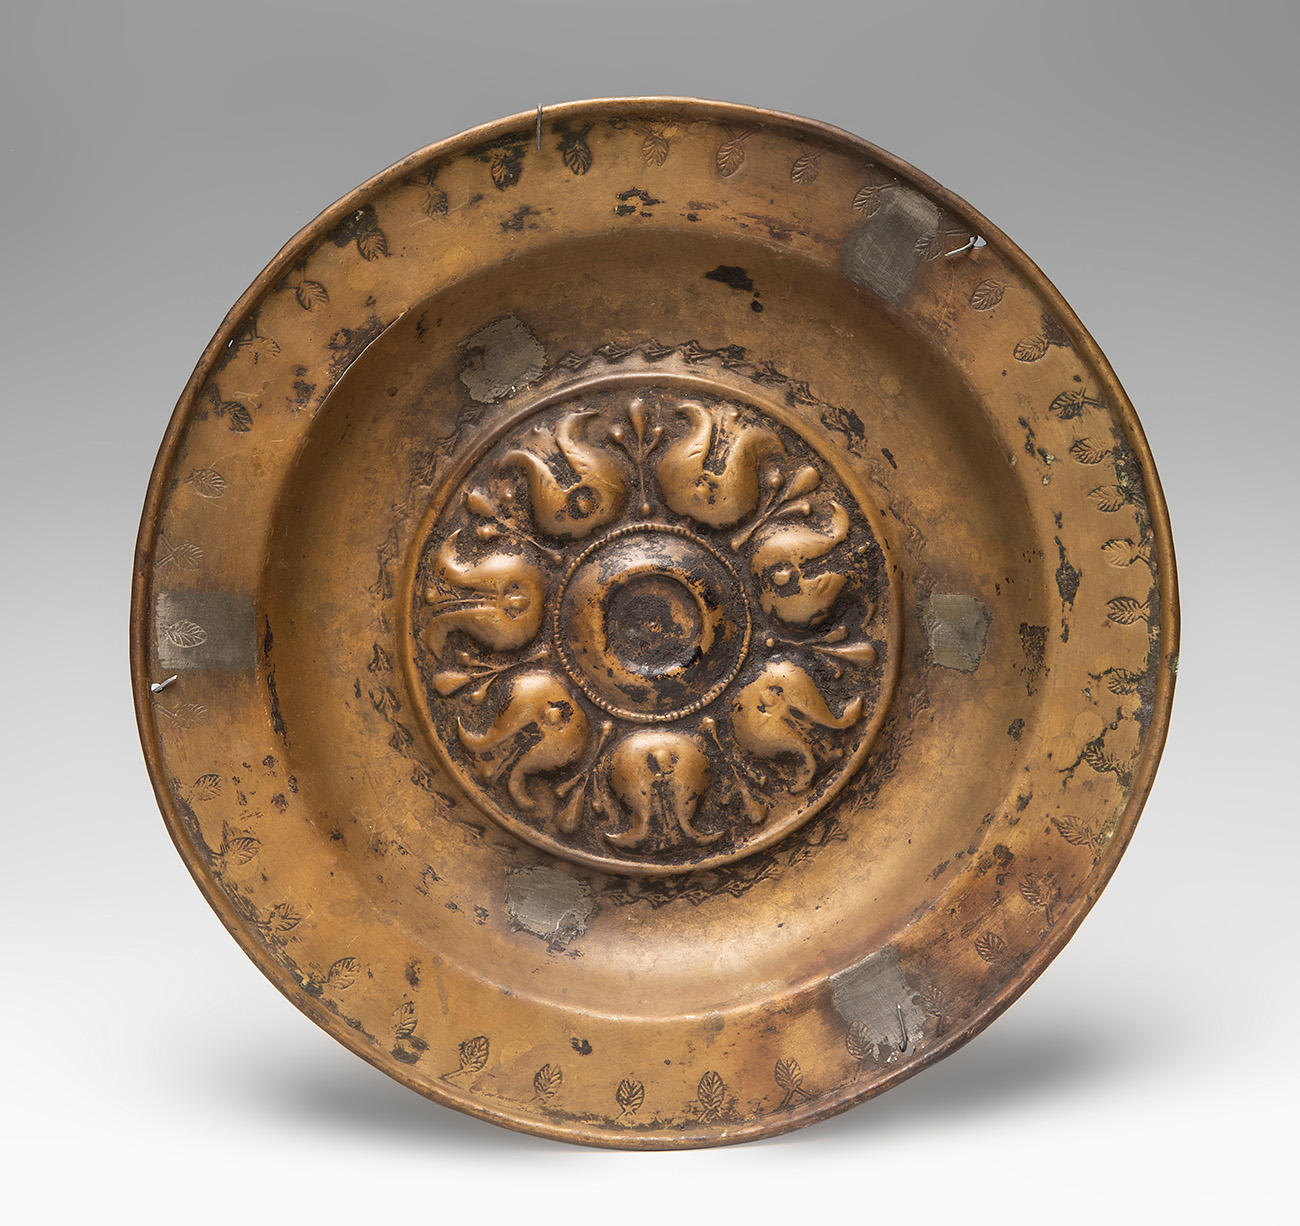 Petition plate. Germany, possibly Nuremberg, 17th century.Gilded copper."Pomegranates".Measurements: